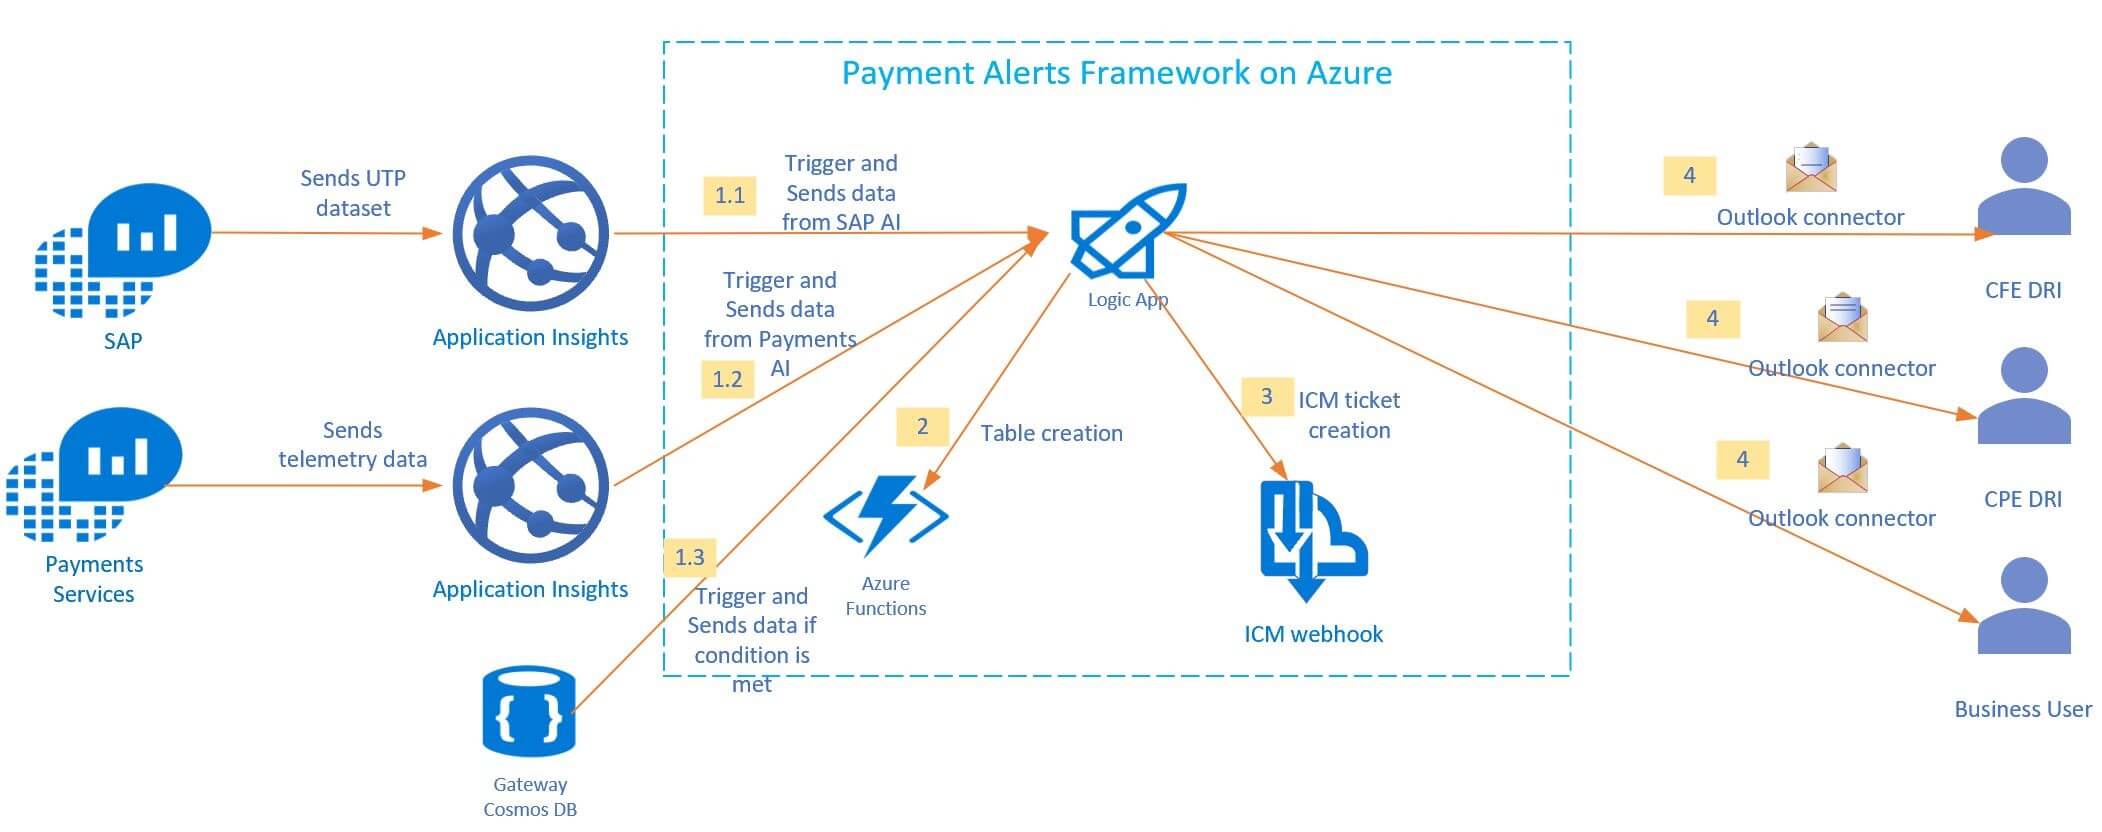 Azure Monitor alerts help Microsoft pay billions of dollars of bills on time